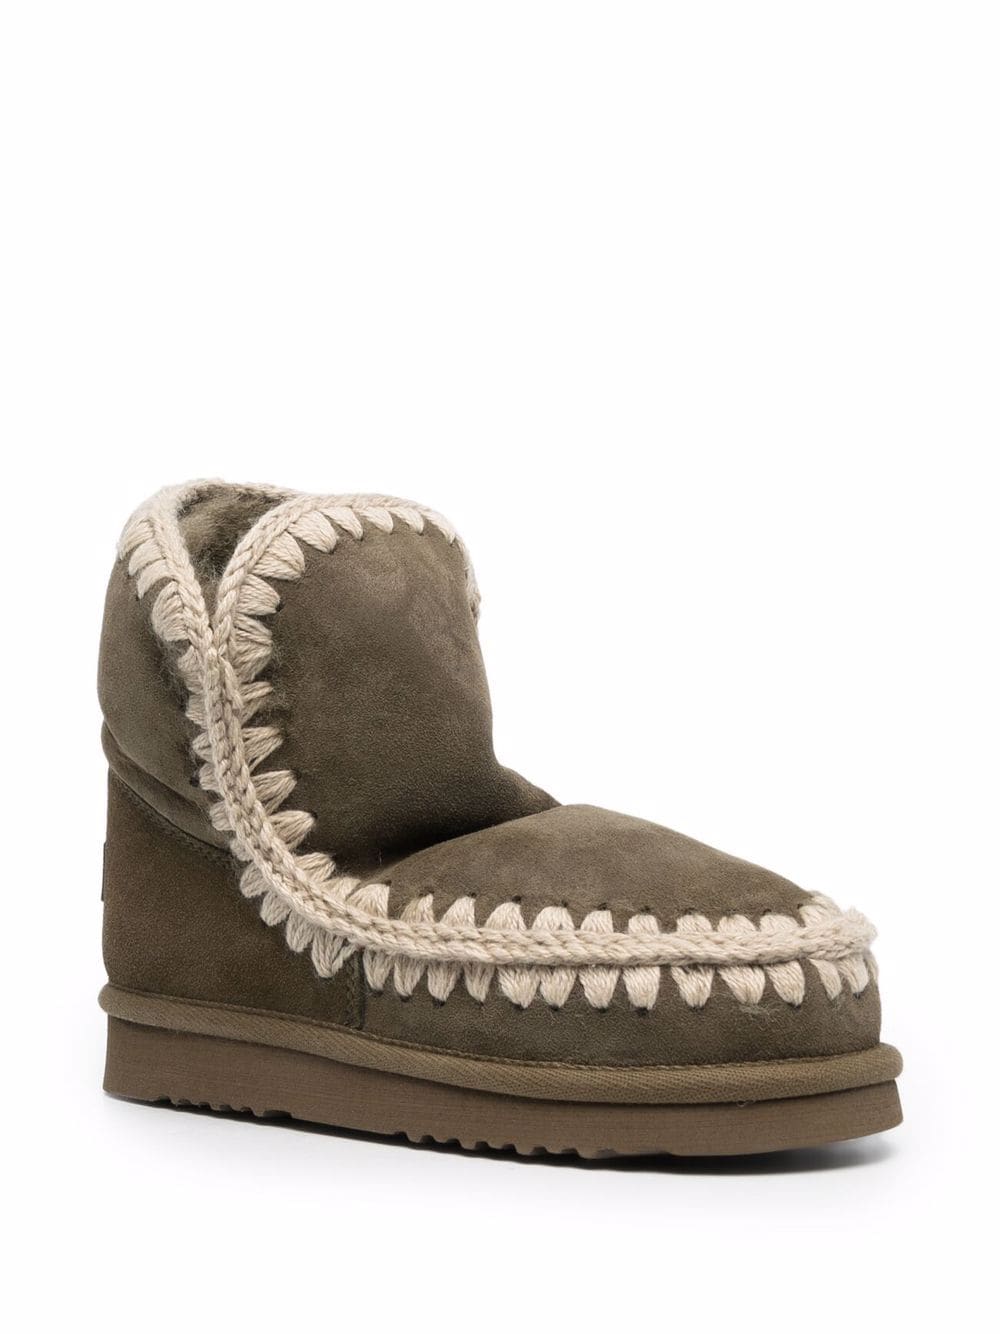 Mou Boots Green